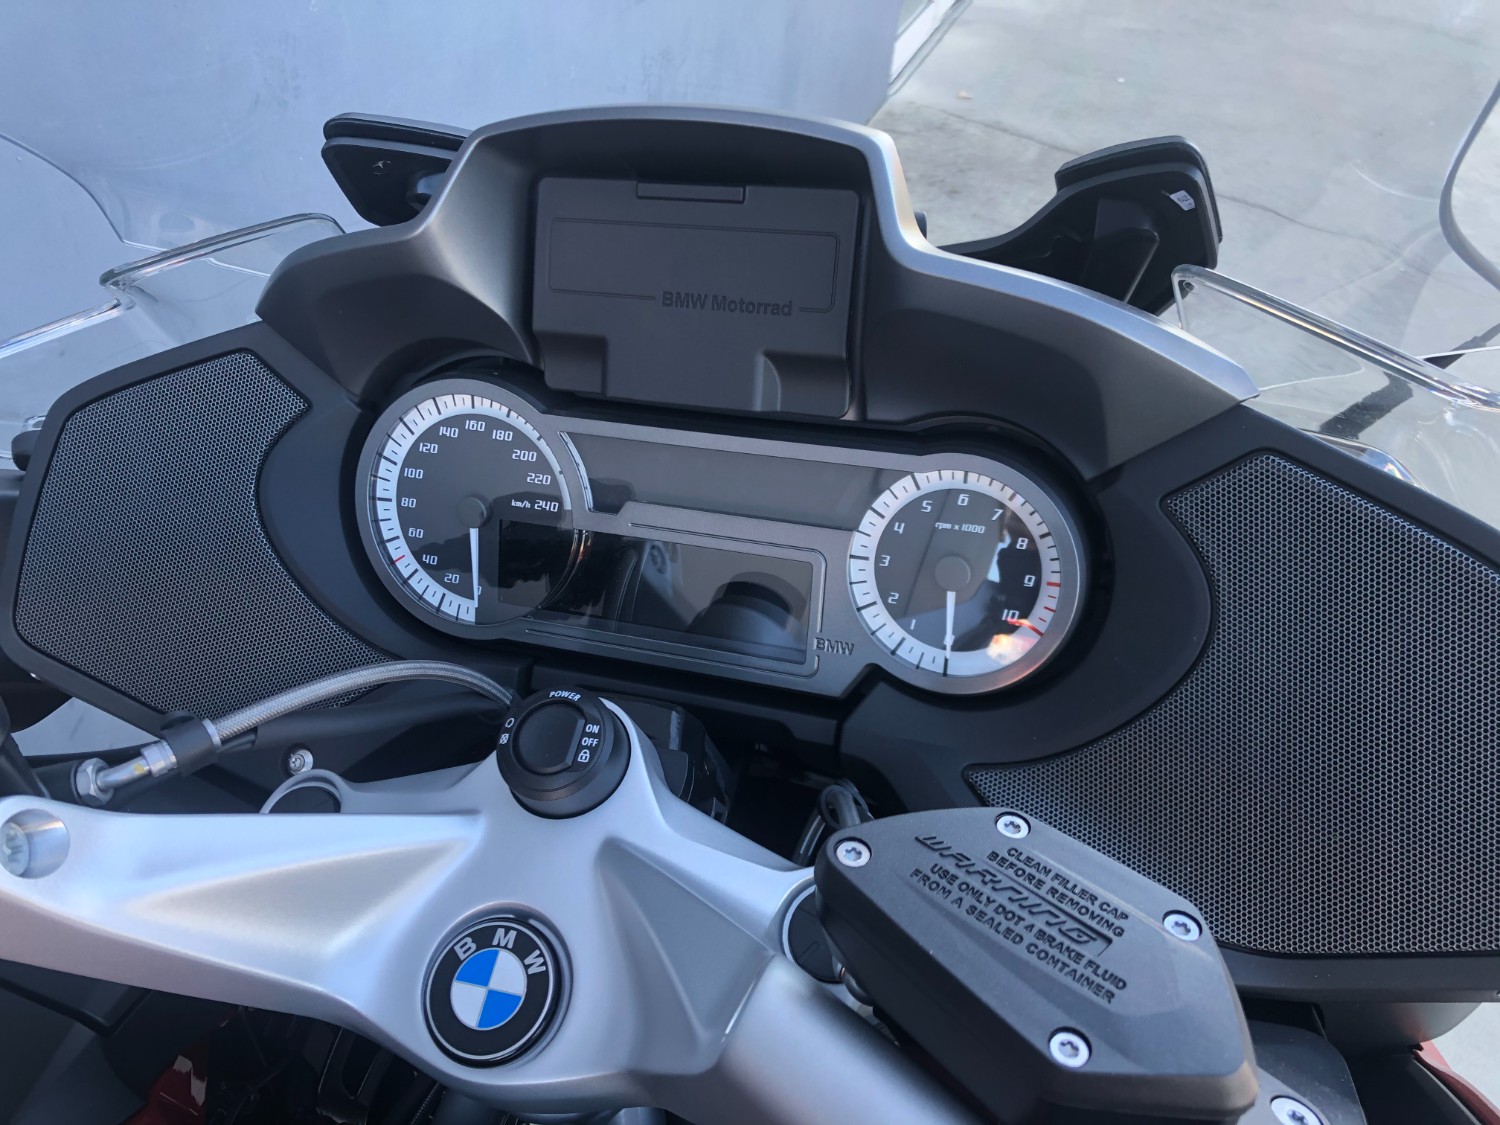 2020 BMW R1250RT SPORT Motorcycle Image 30